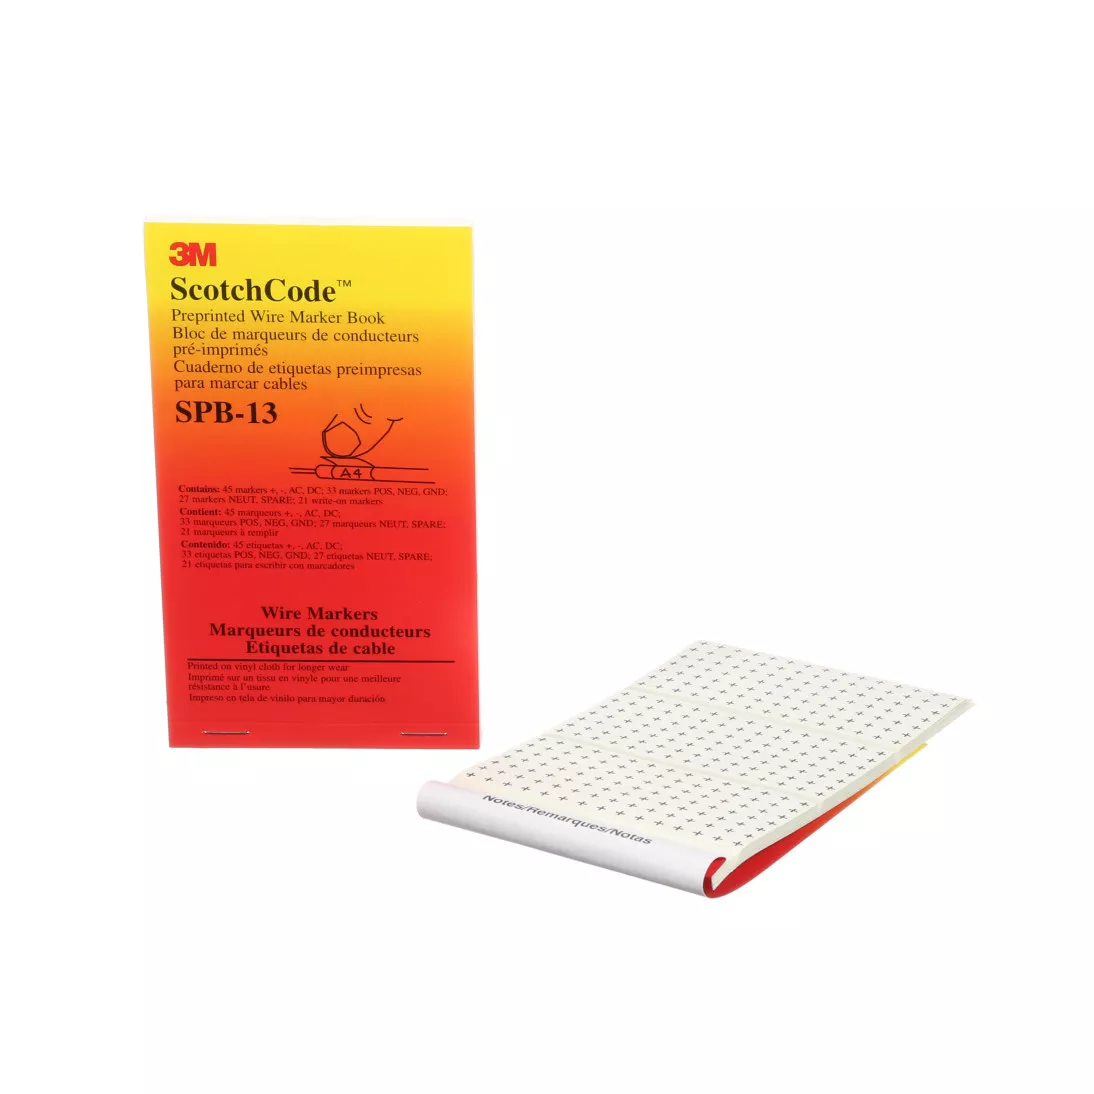 3M™ ScotchCode™ Pre-Printed Wire Marker Book SPB-13, black print on a
white background highlights the characters, 5/Bag